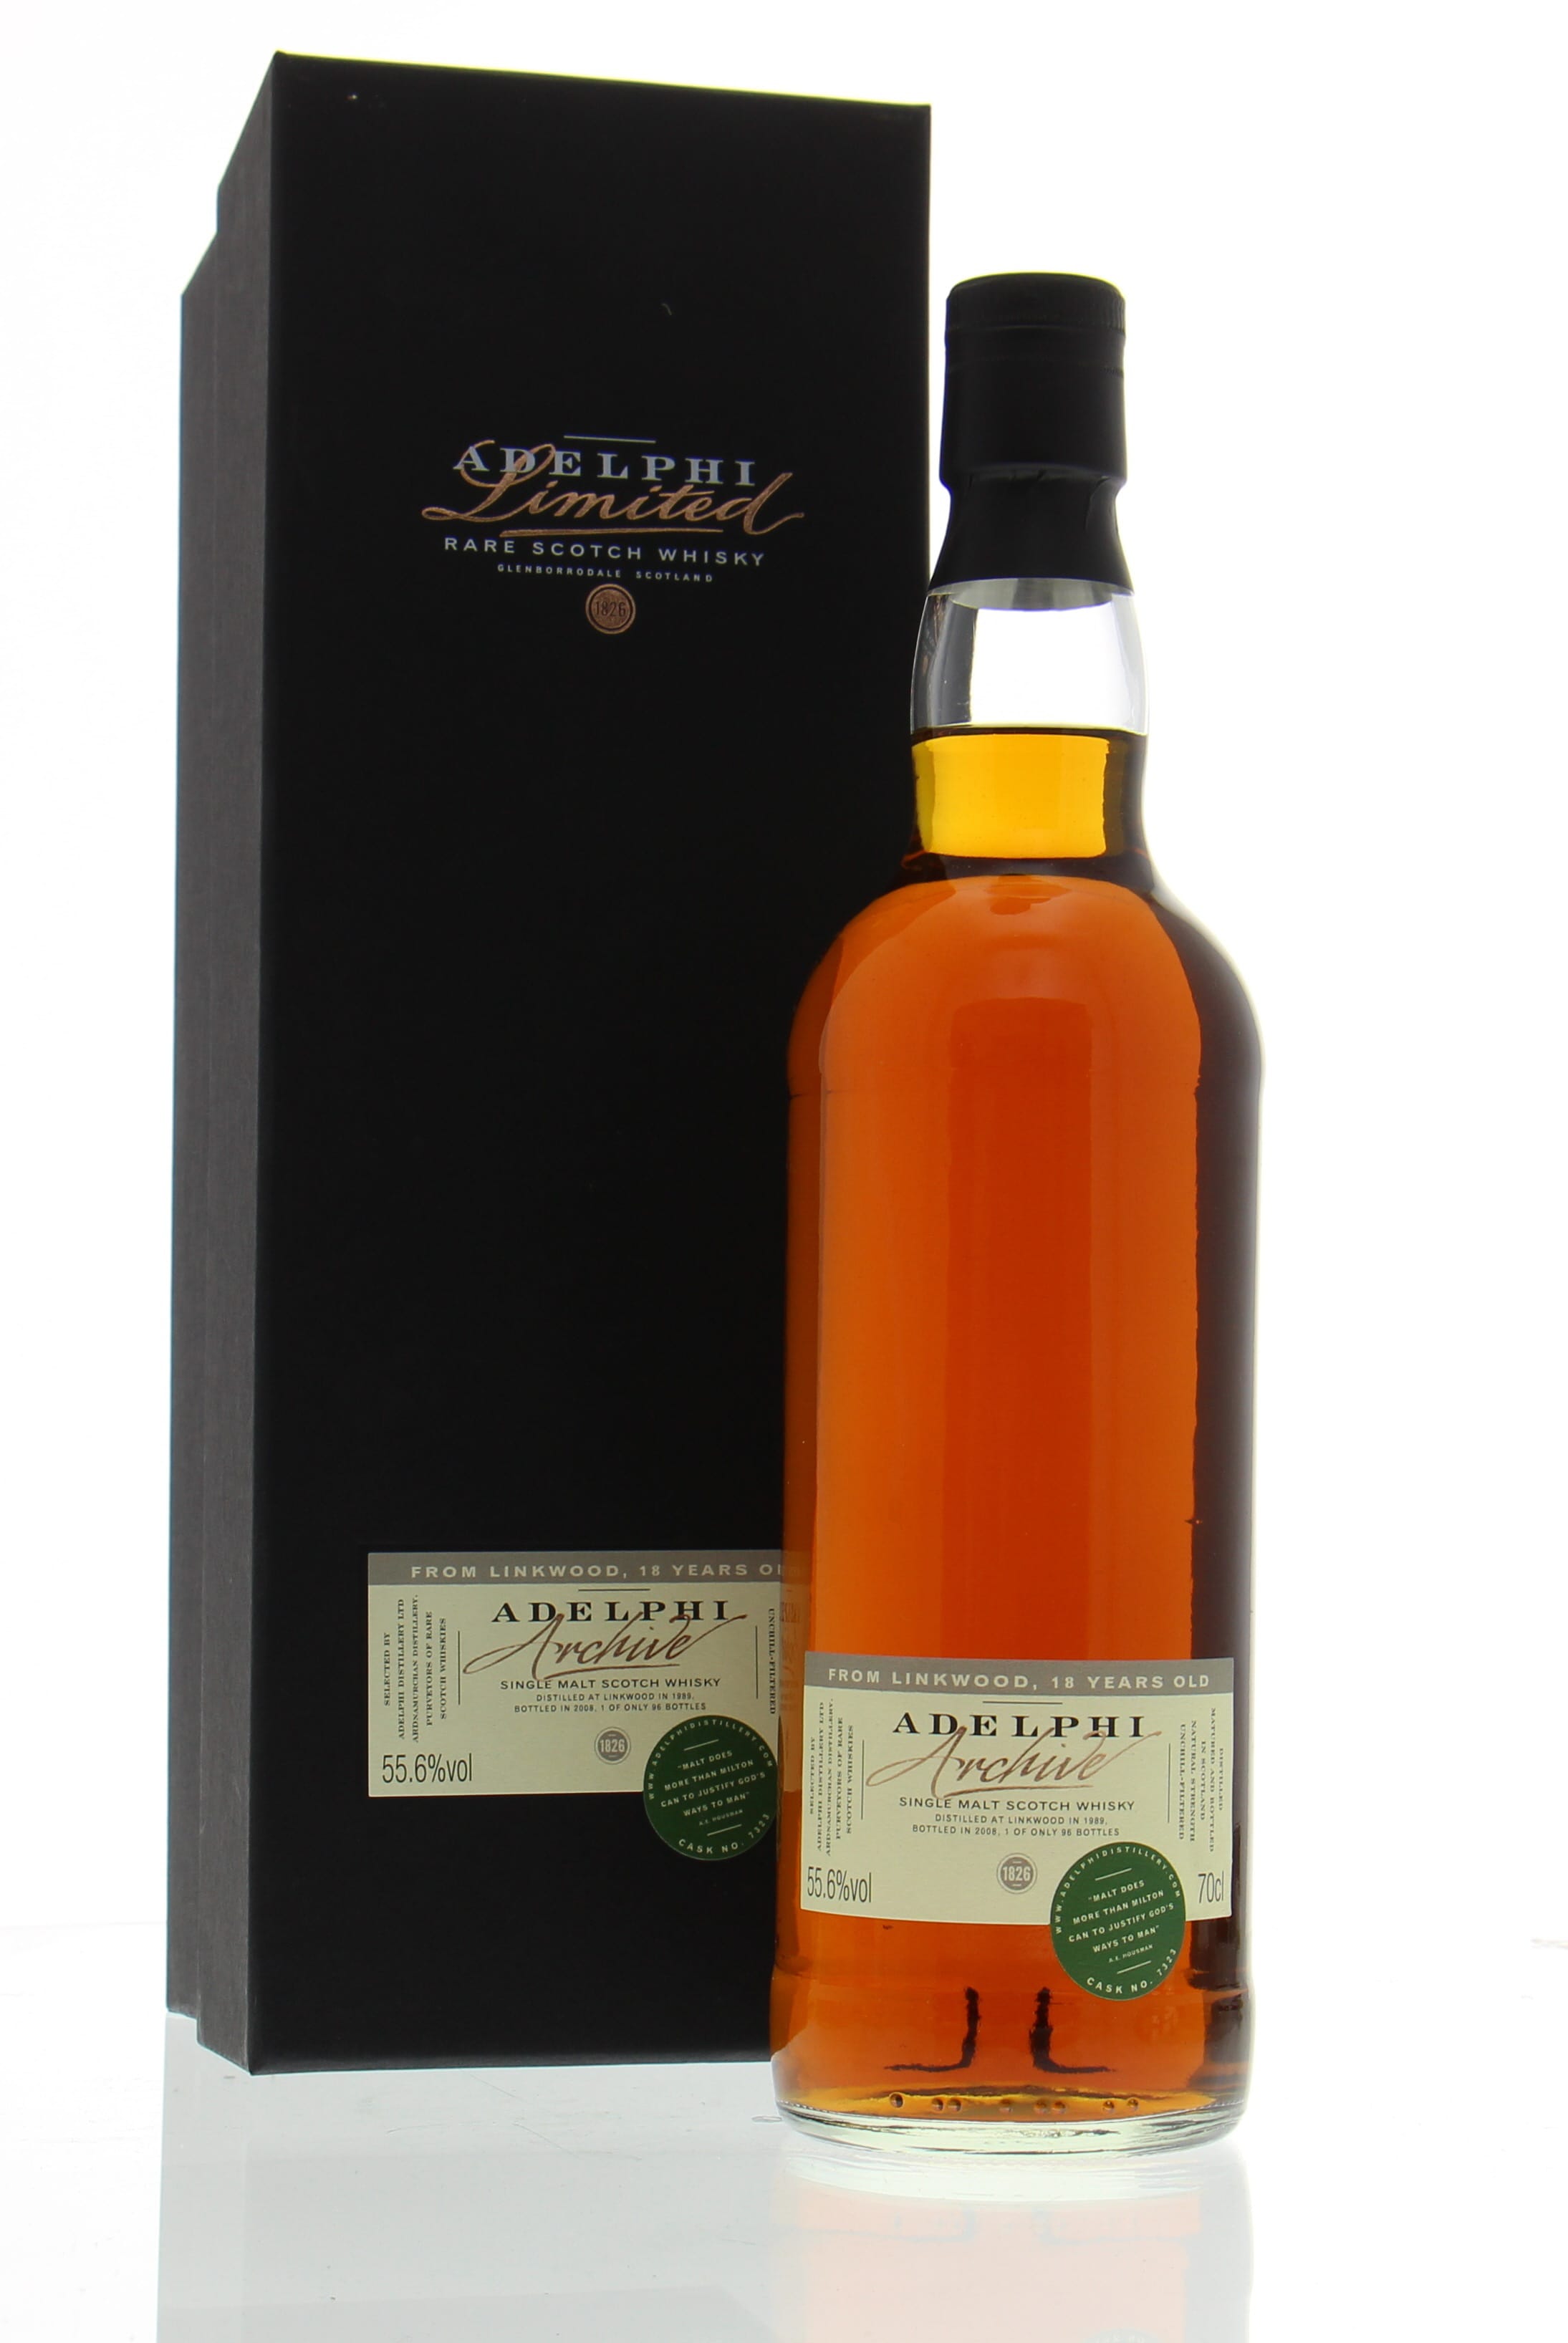 Linkwood - 18 Years Old Adelphi Archive Cask:7323 55.6% 1989 In Original Container